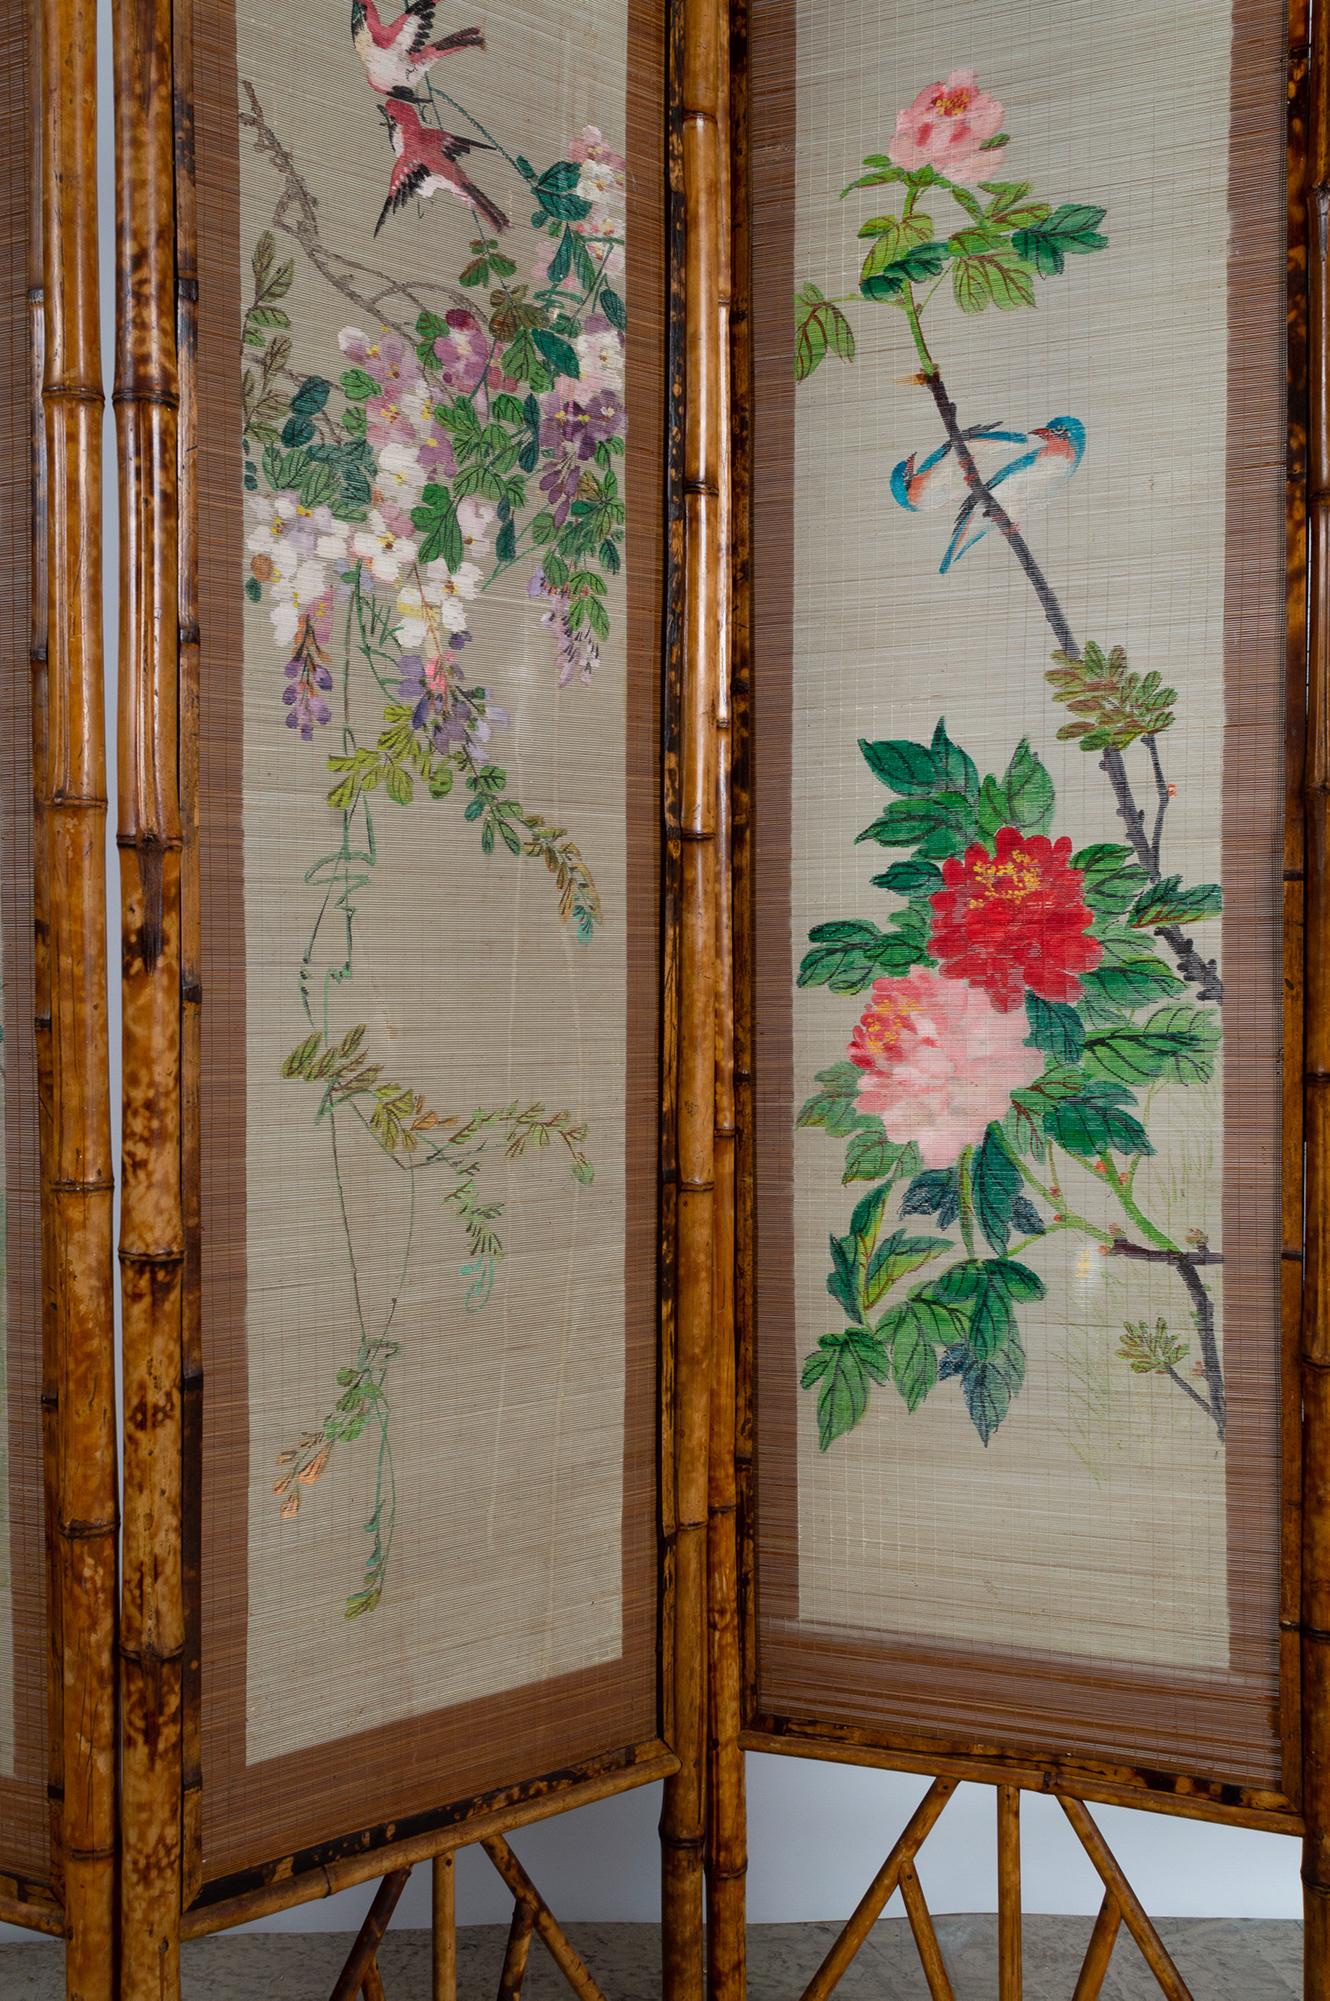 Vintage Chinese hand painted bamboo screen, China, circa 1950.
In very good vintage condition with minor signs of wear (please refer to photos).